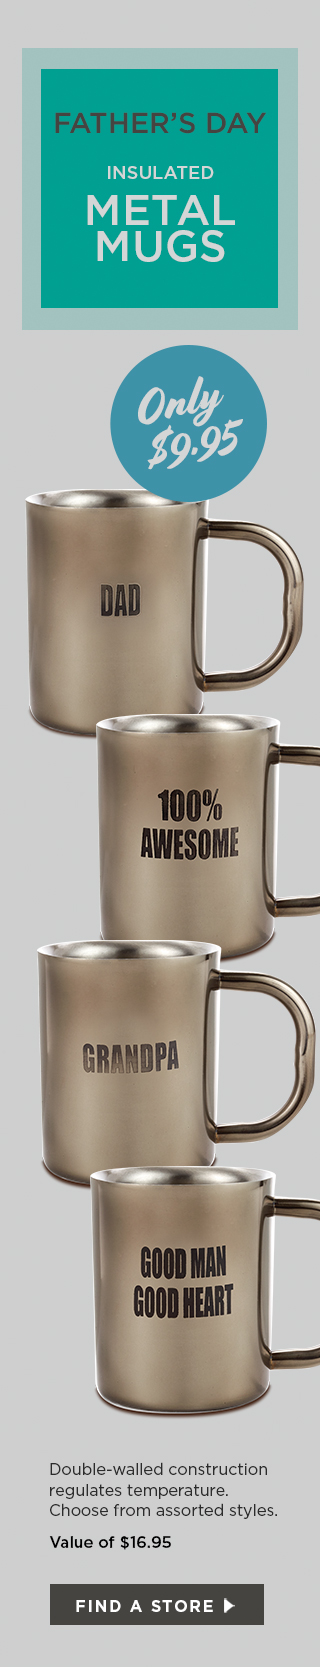 Father’s Day Insulated Metal Mugs